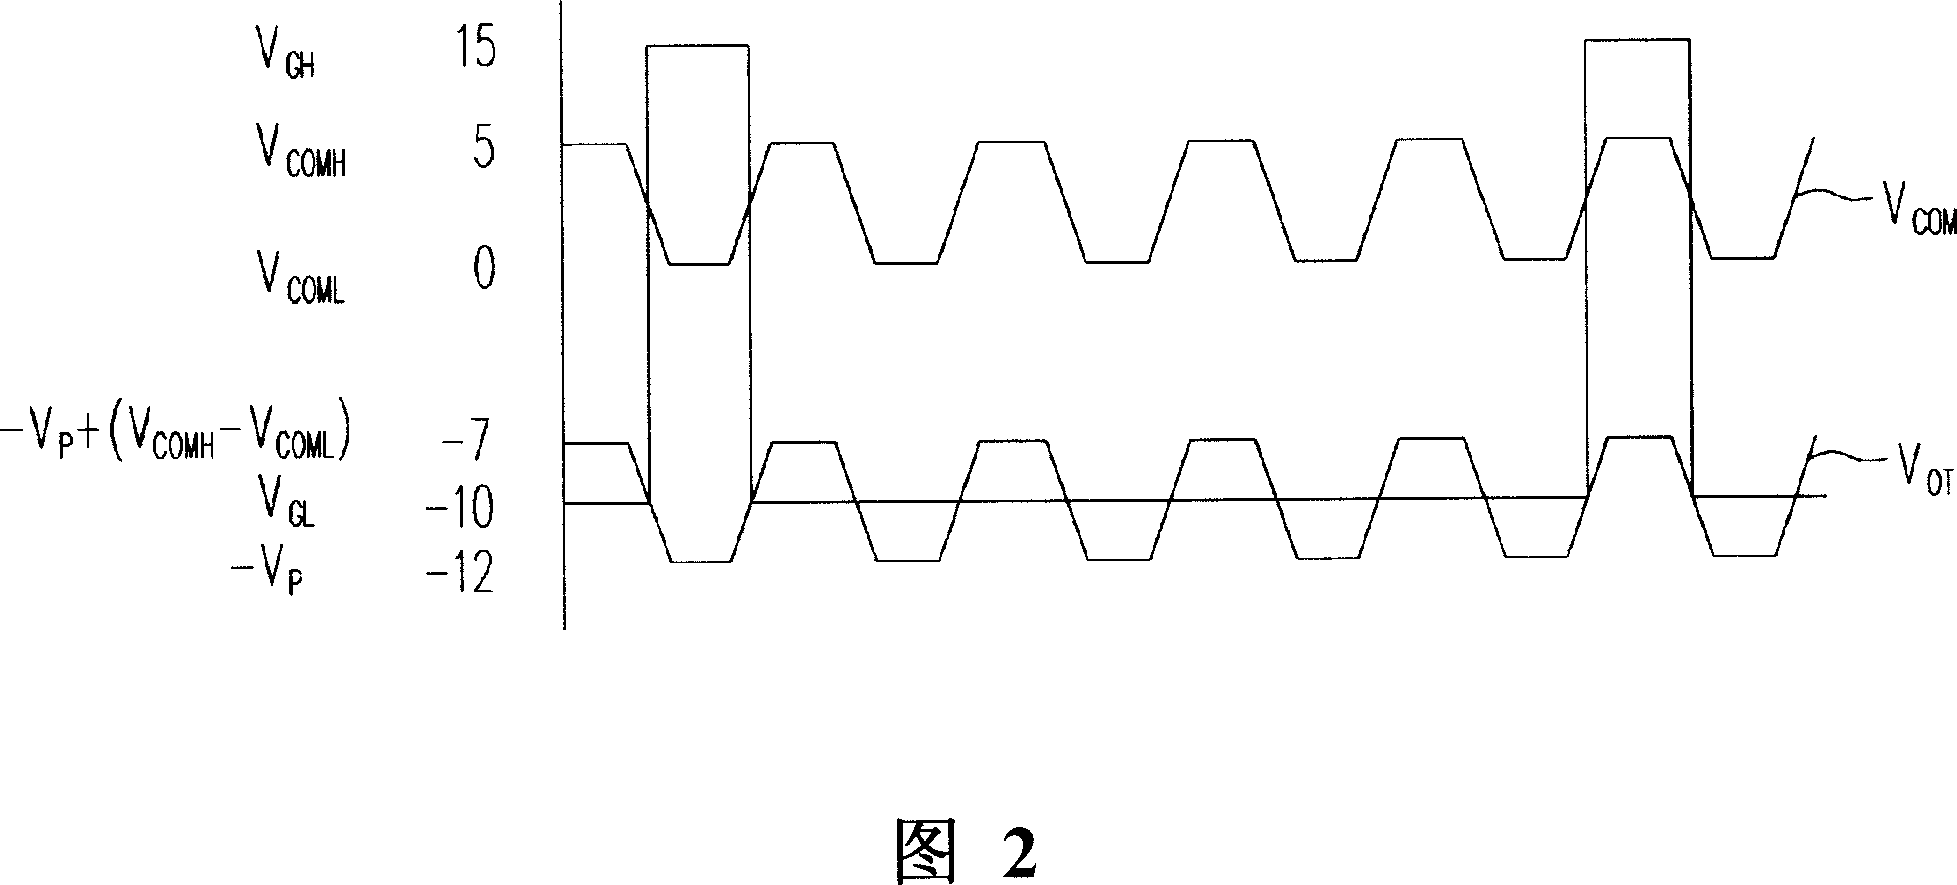 Shared voltage modification circuit and method